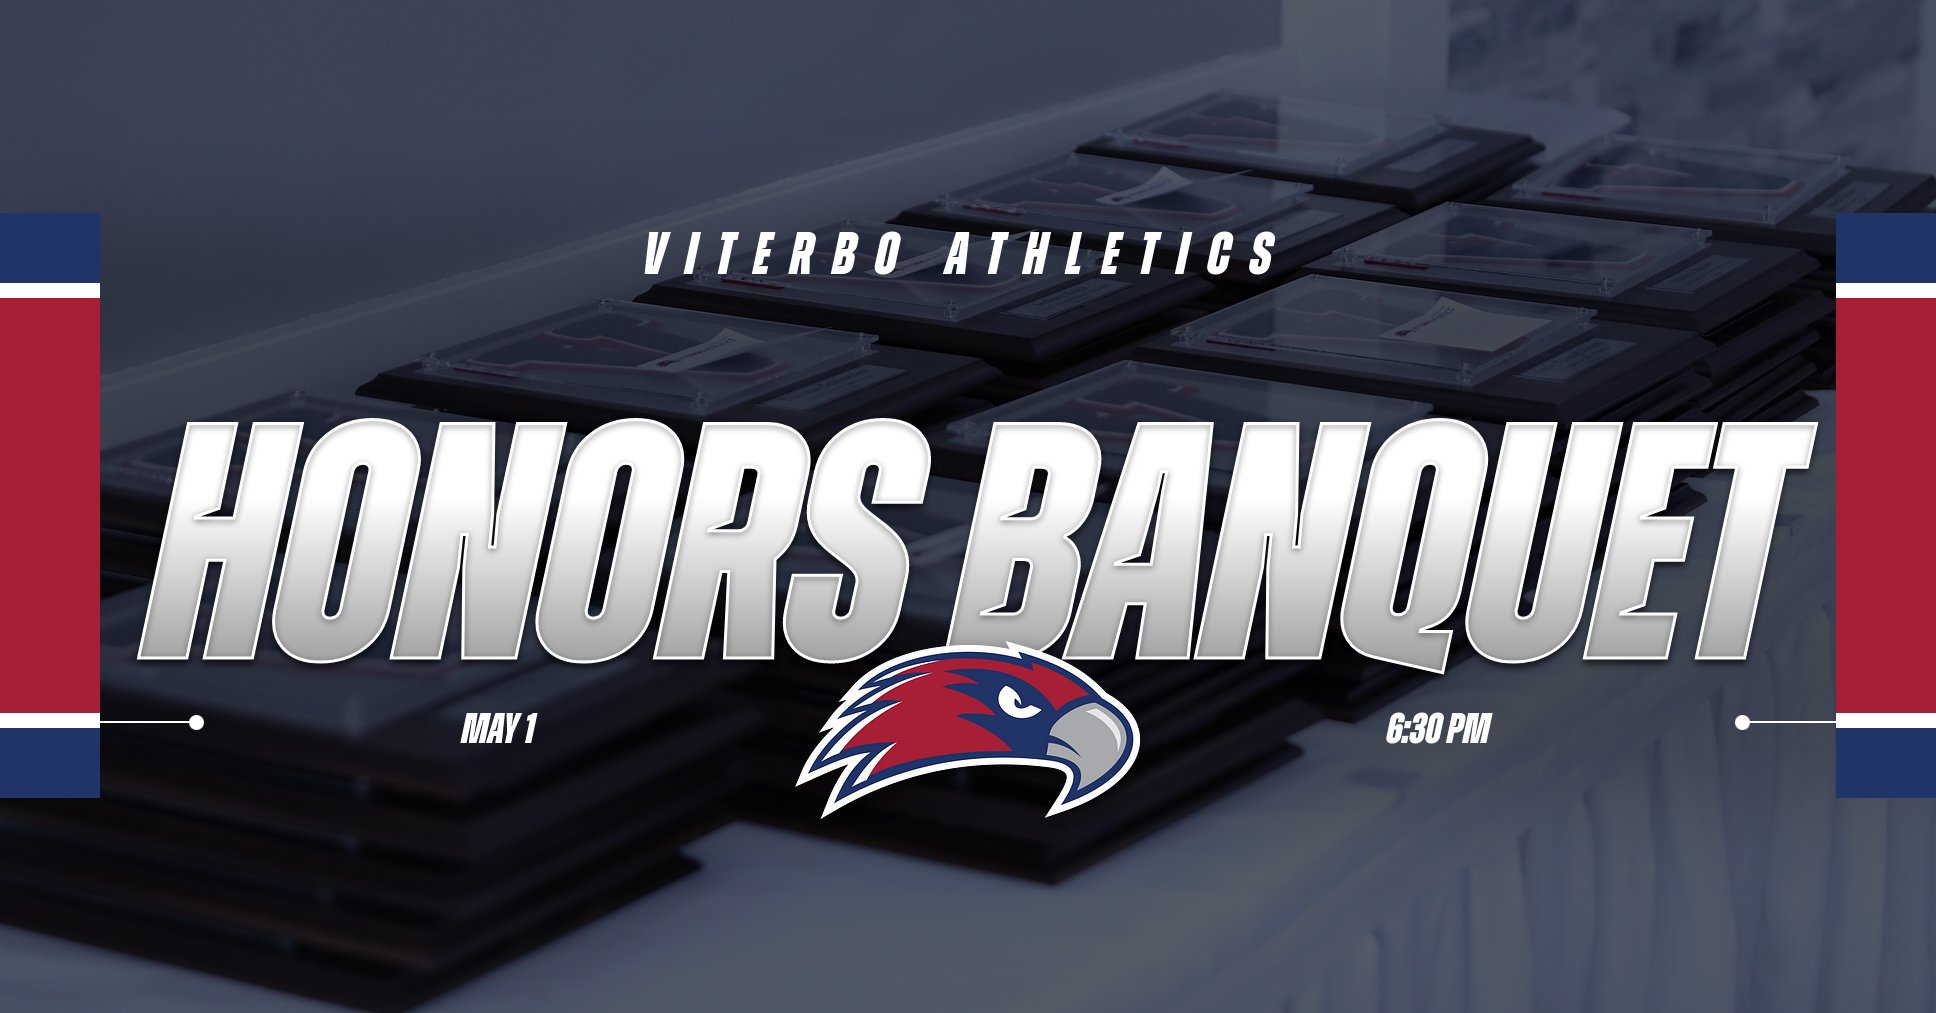 Viterbo Athletics to Host 2023 Honors Banquet